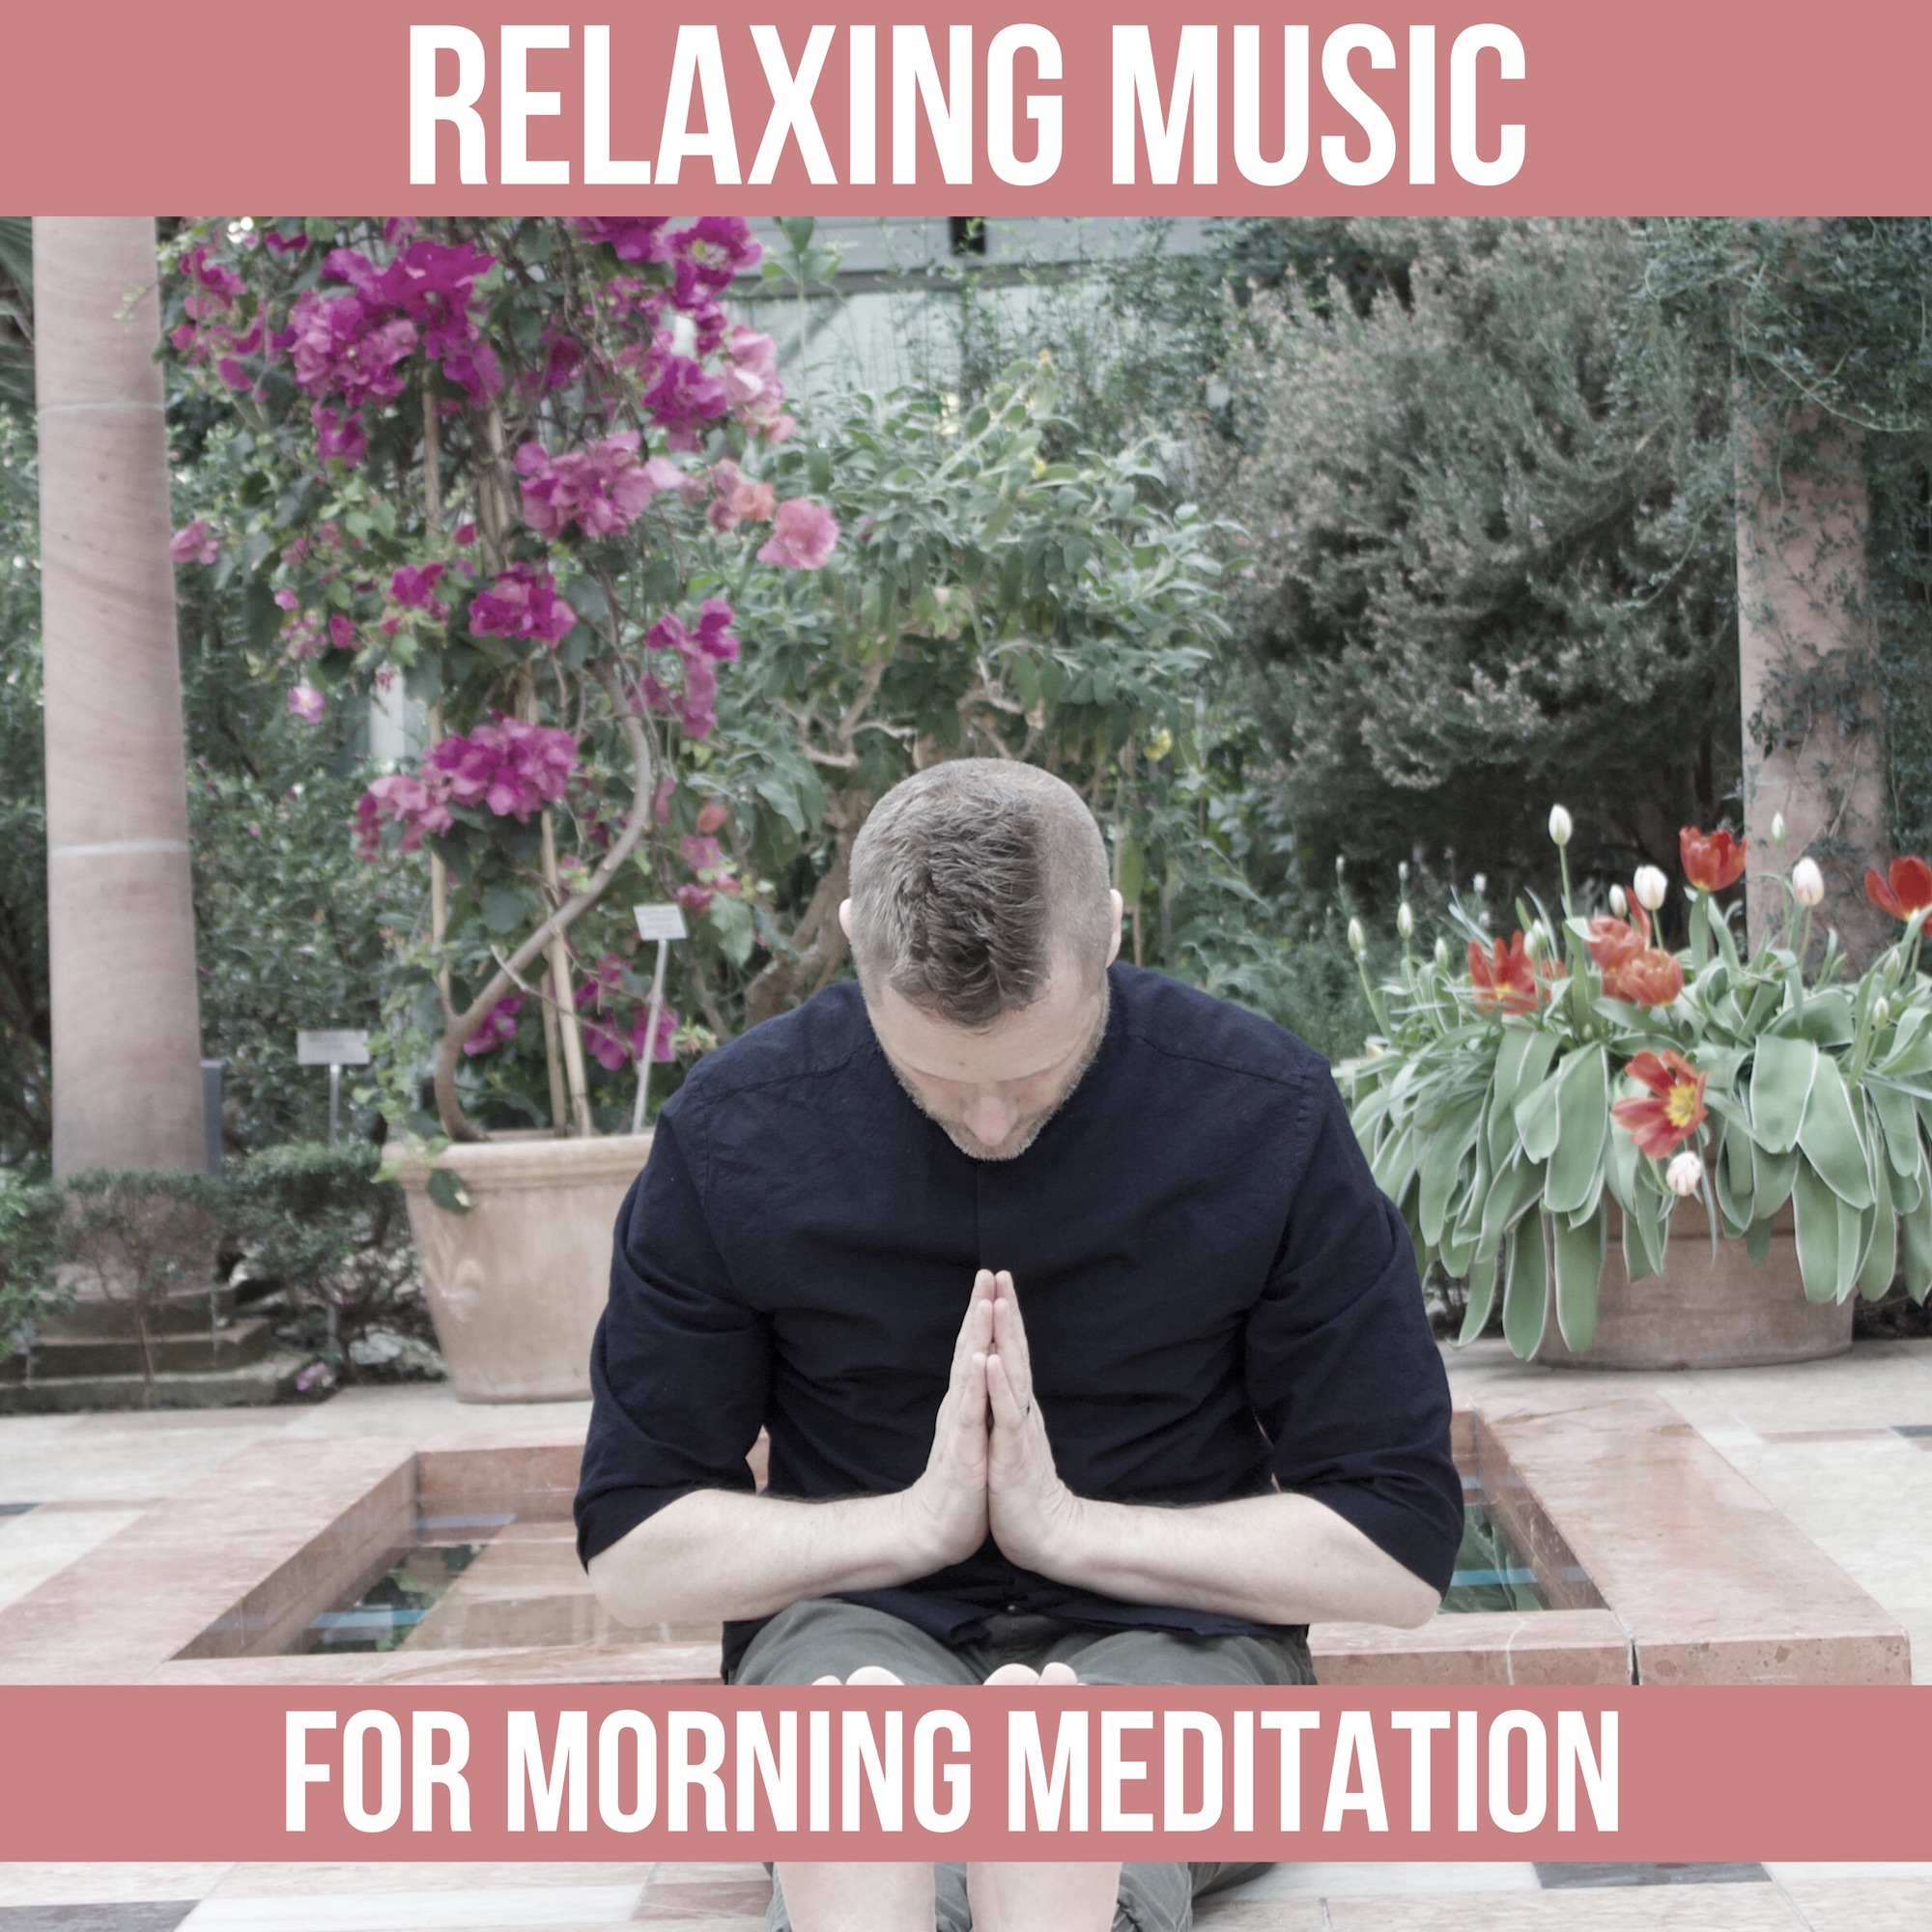 30 minutes of calm music for morning meditation.